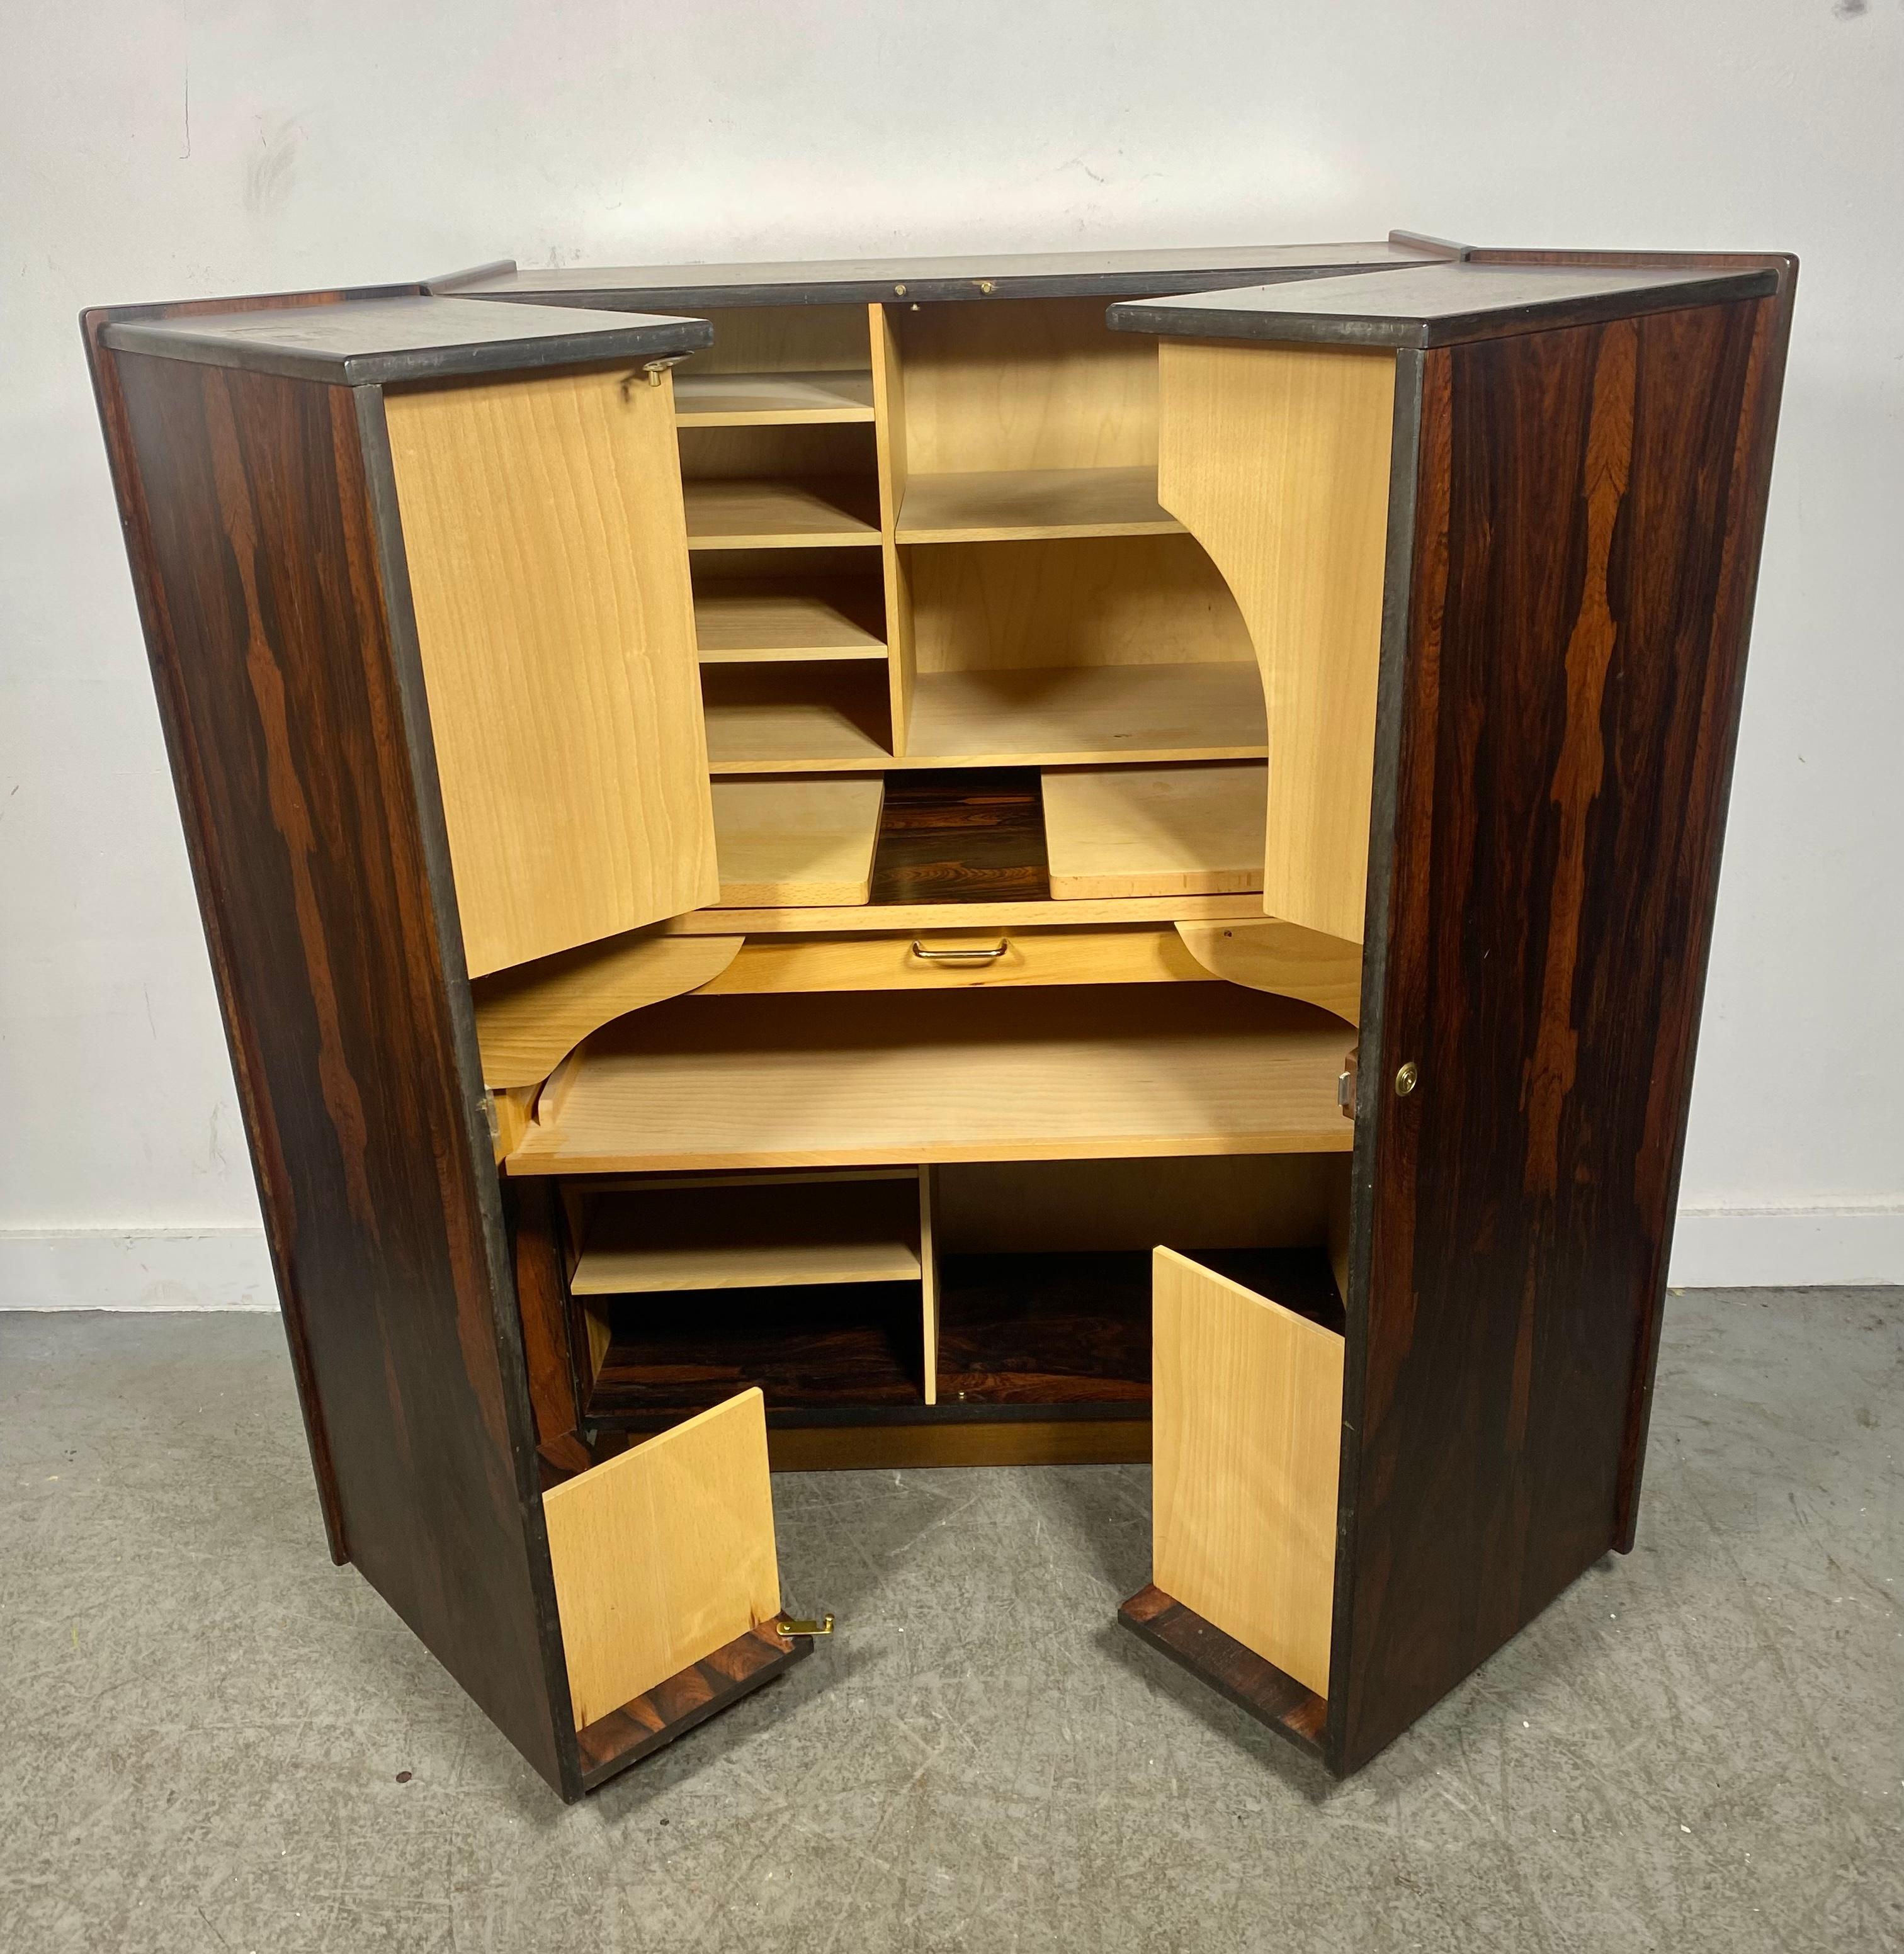 Classic Mid-Century Magic Box by Mummenthaler & Meier. Tall Handsome Cabinet that Opens To An intricate Desk with A Multitude of Storage Space and Shelving. Beautiful richly grained book-matched Rosewood Exterior with Fold Out Desk ... Birch